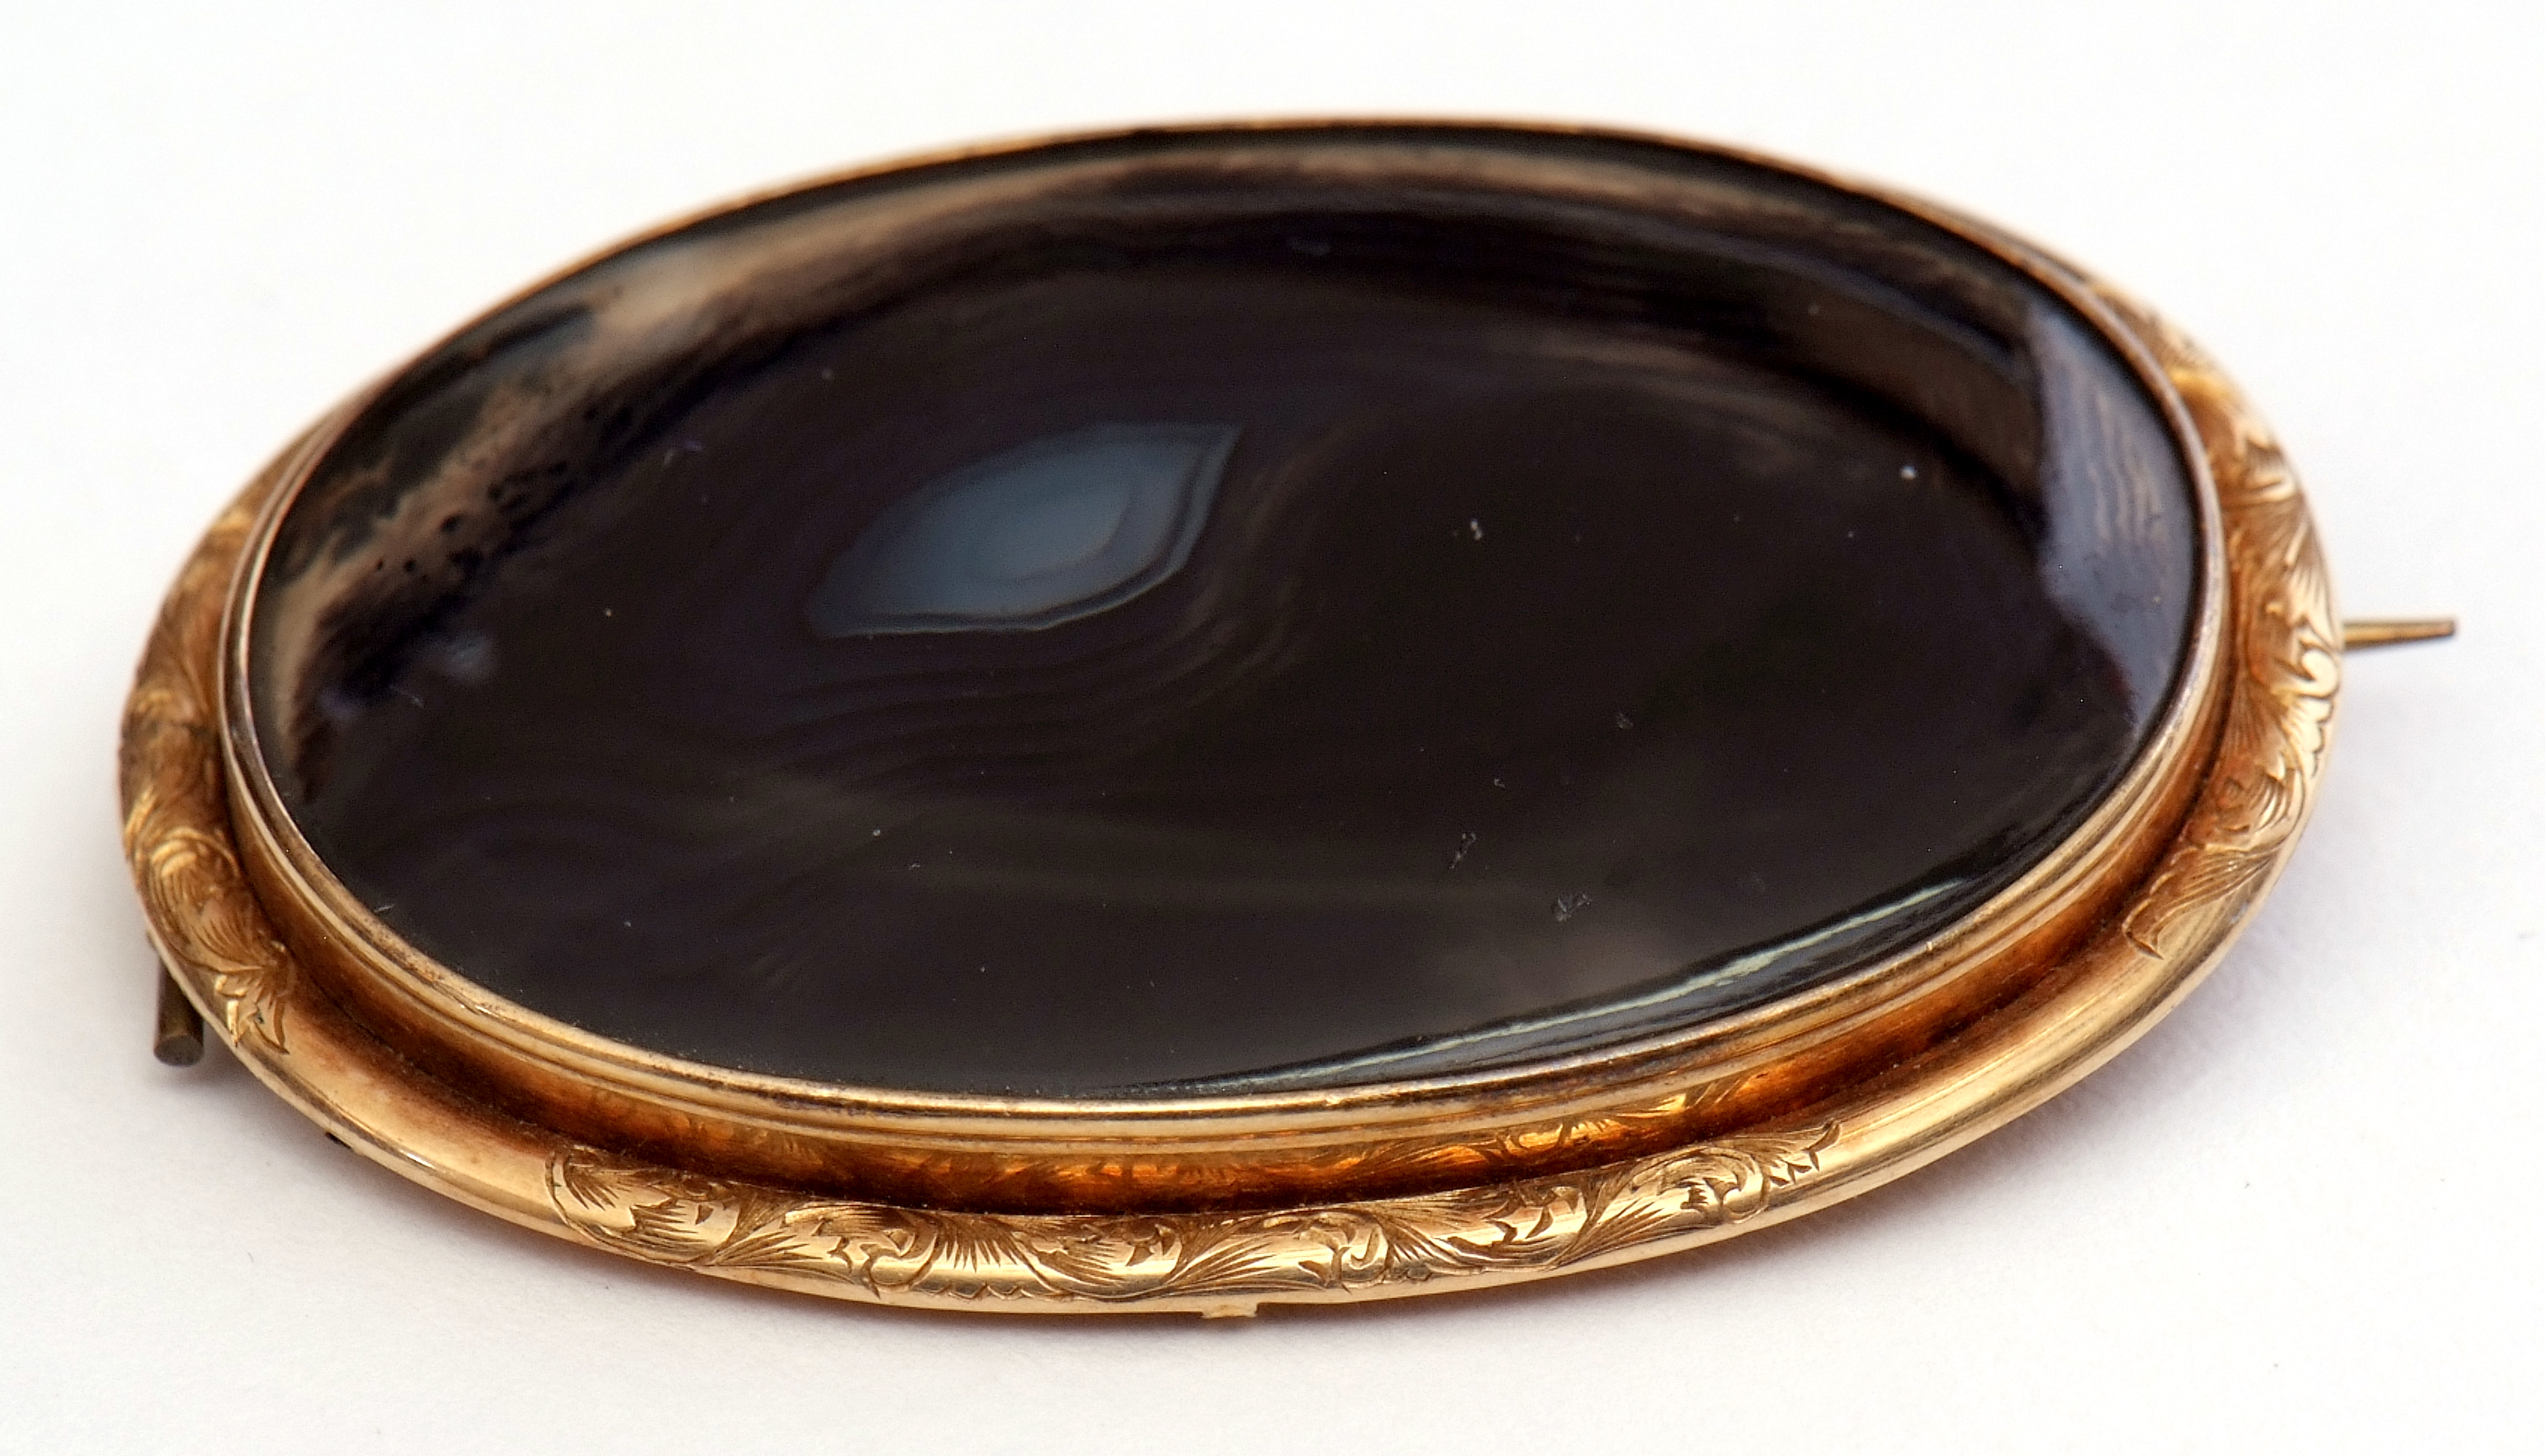 Victorian large agate brooch of oval shape framed in an ornate gold mount, 5 x 3cm